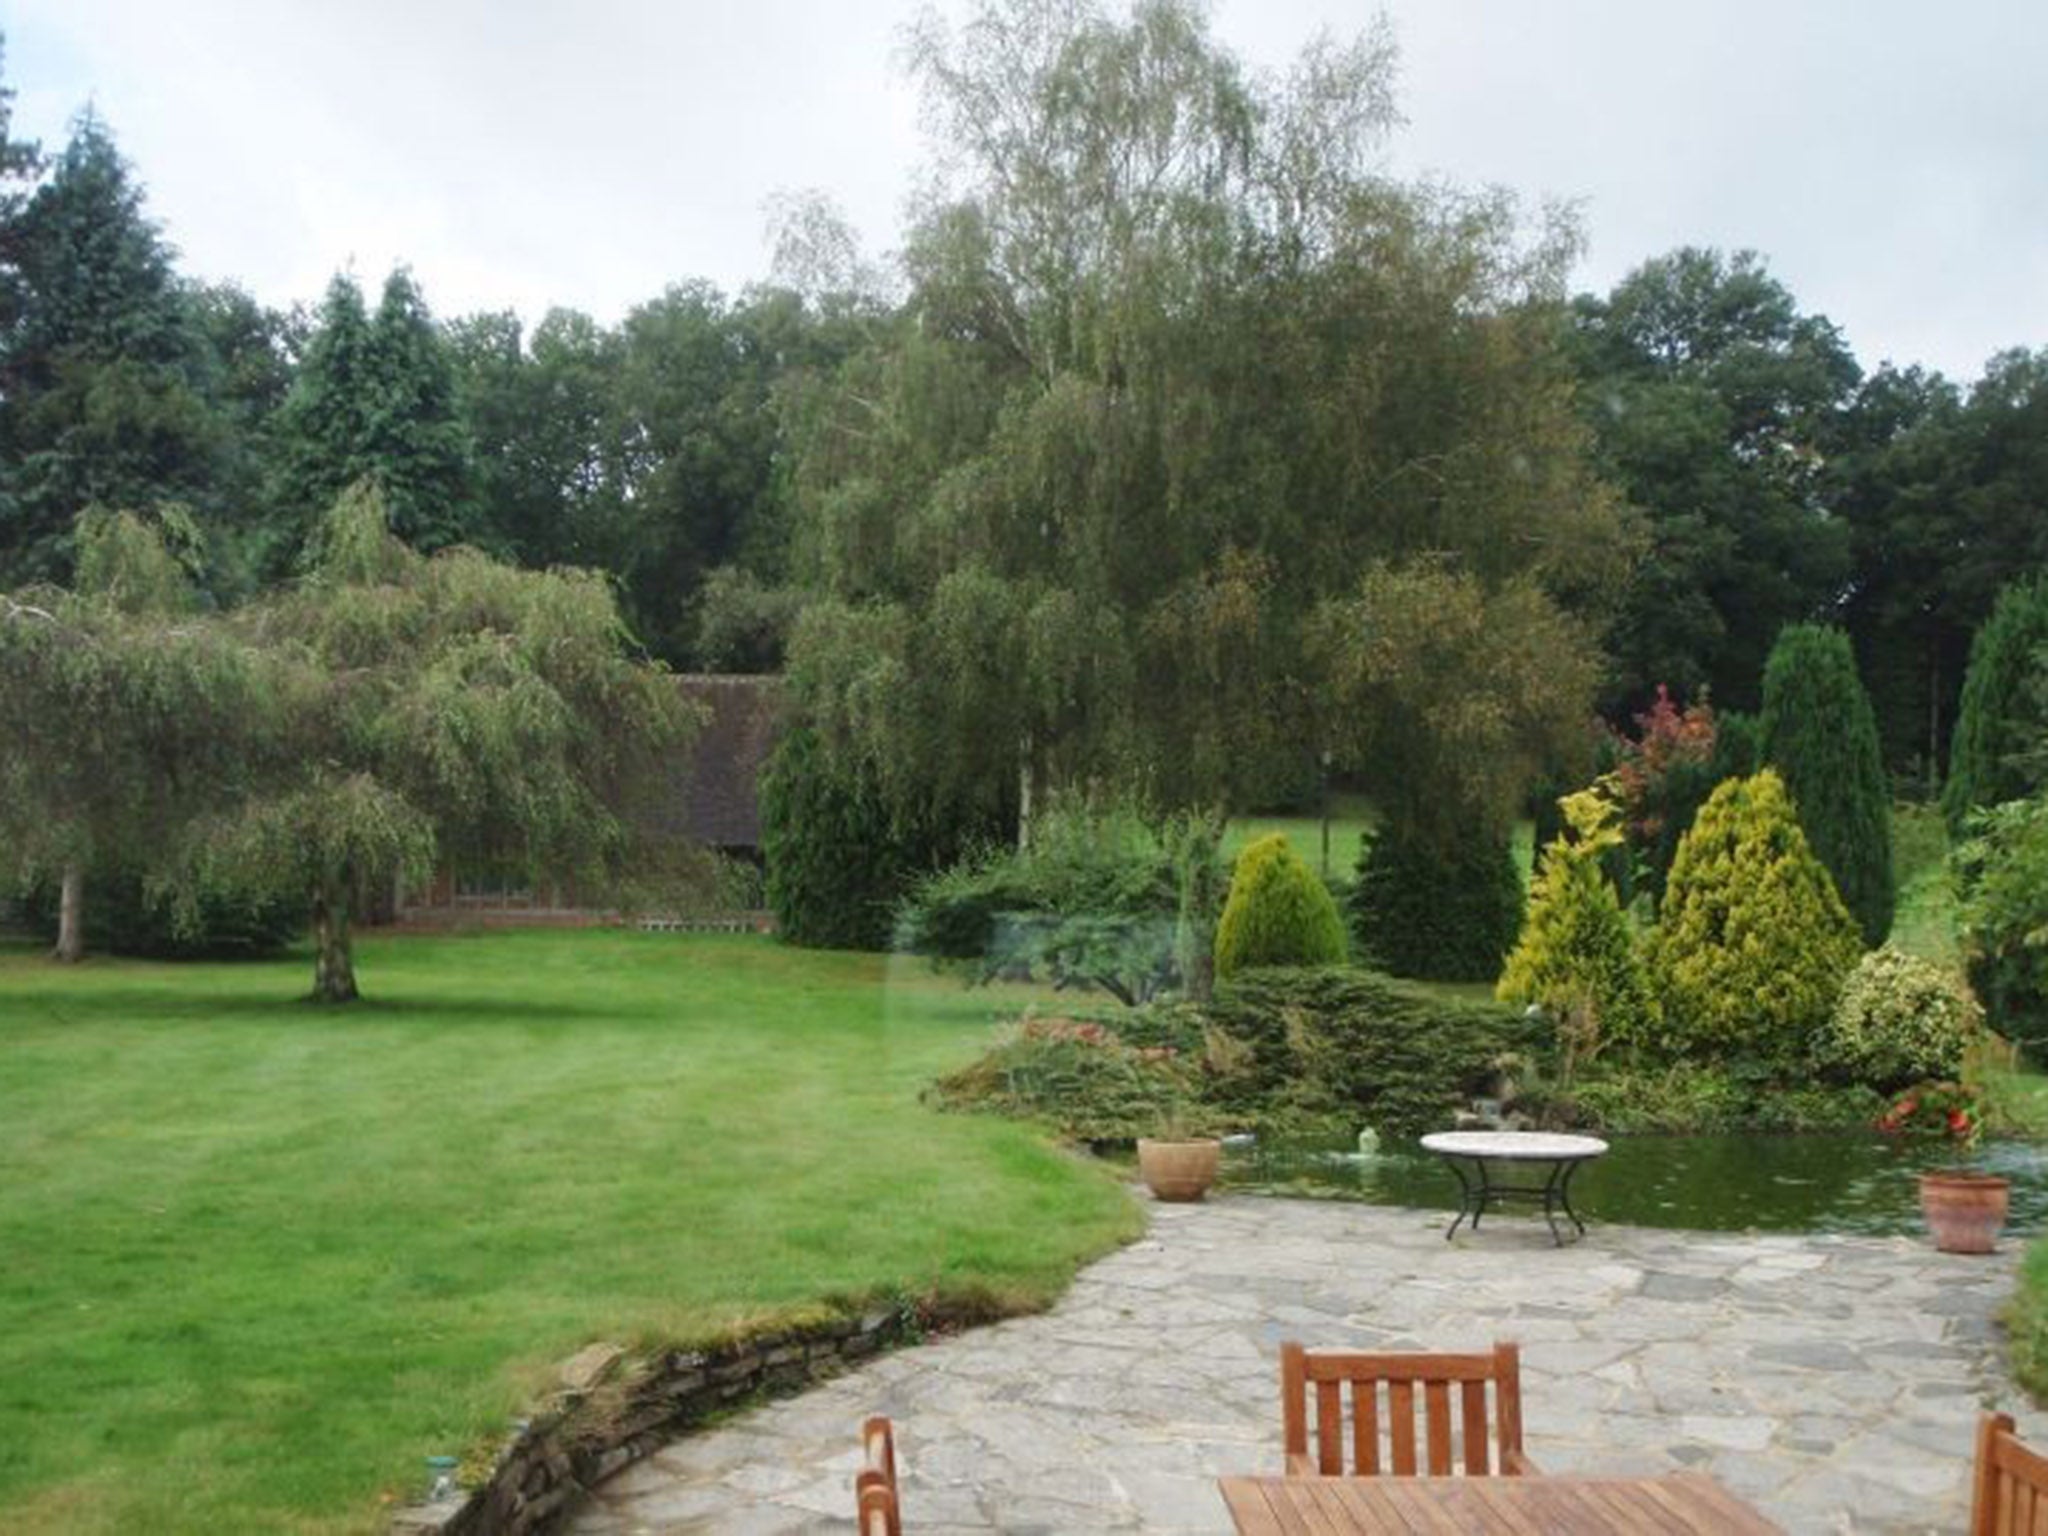 The garden of one of Walewski's homes